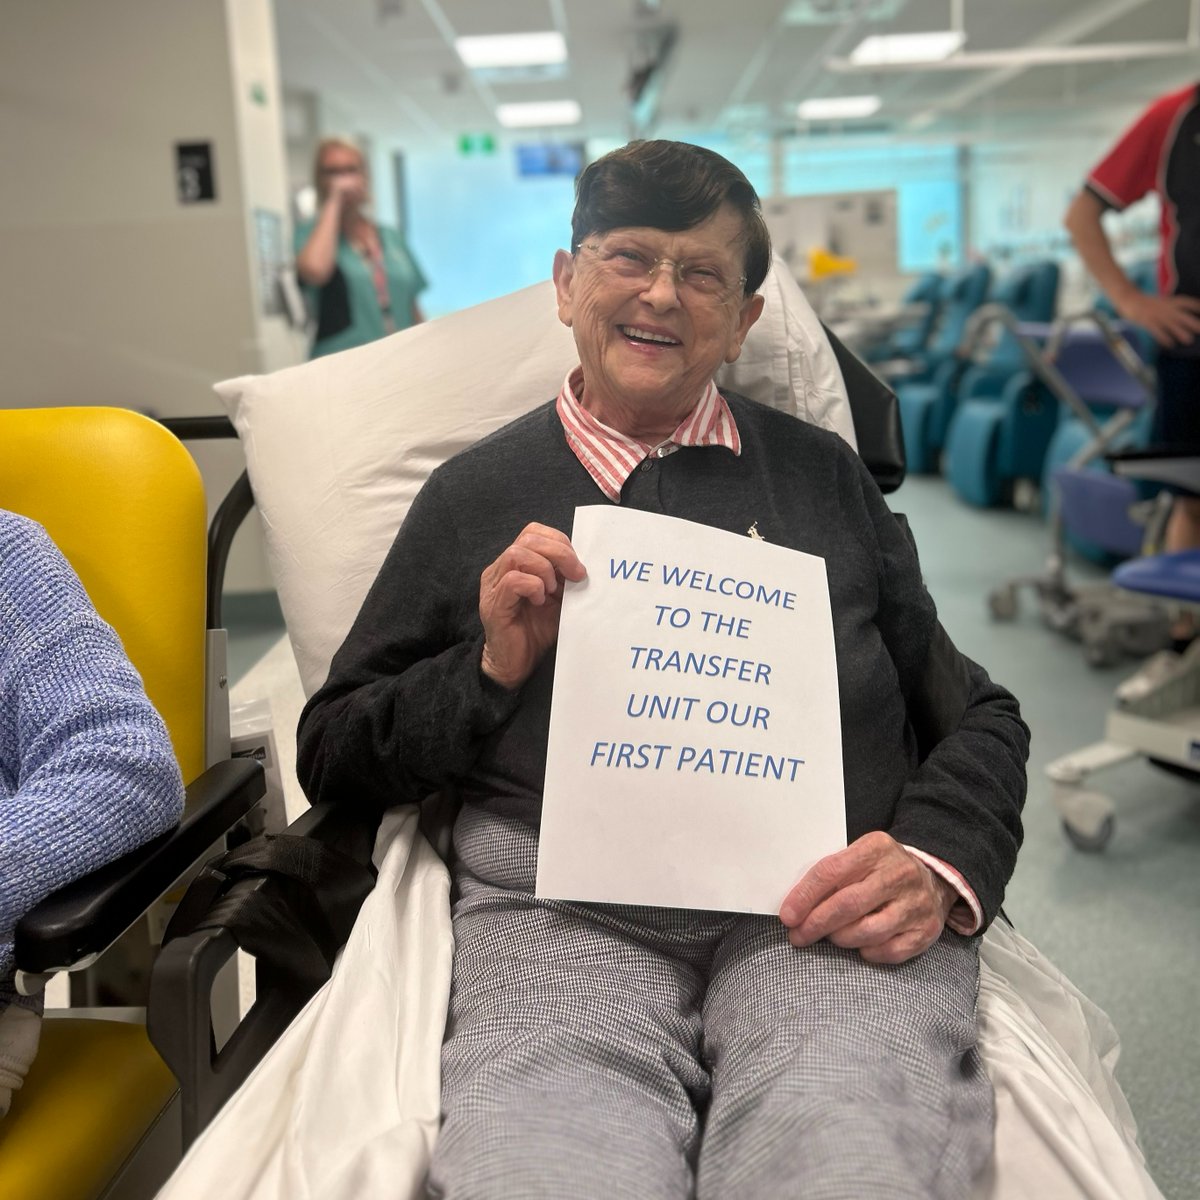 79-year-old Rosemary Probst is the first patient in the new Robina Hospital Transfer Unit. The new unit enhances access for patients, families, and caregivers. 'They’re just wonderful staff and it’s a pleasure to be with them all in this new space,” Rosemary said. ❤️